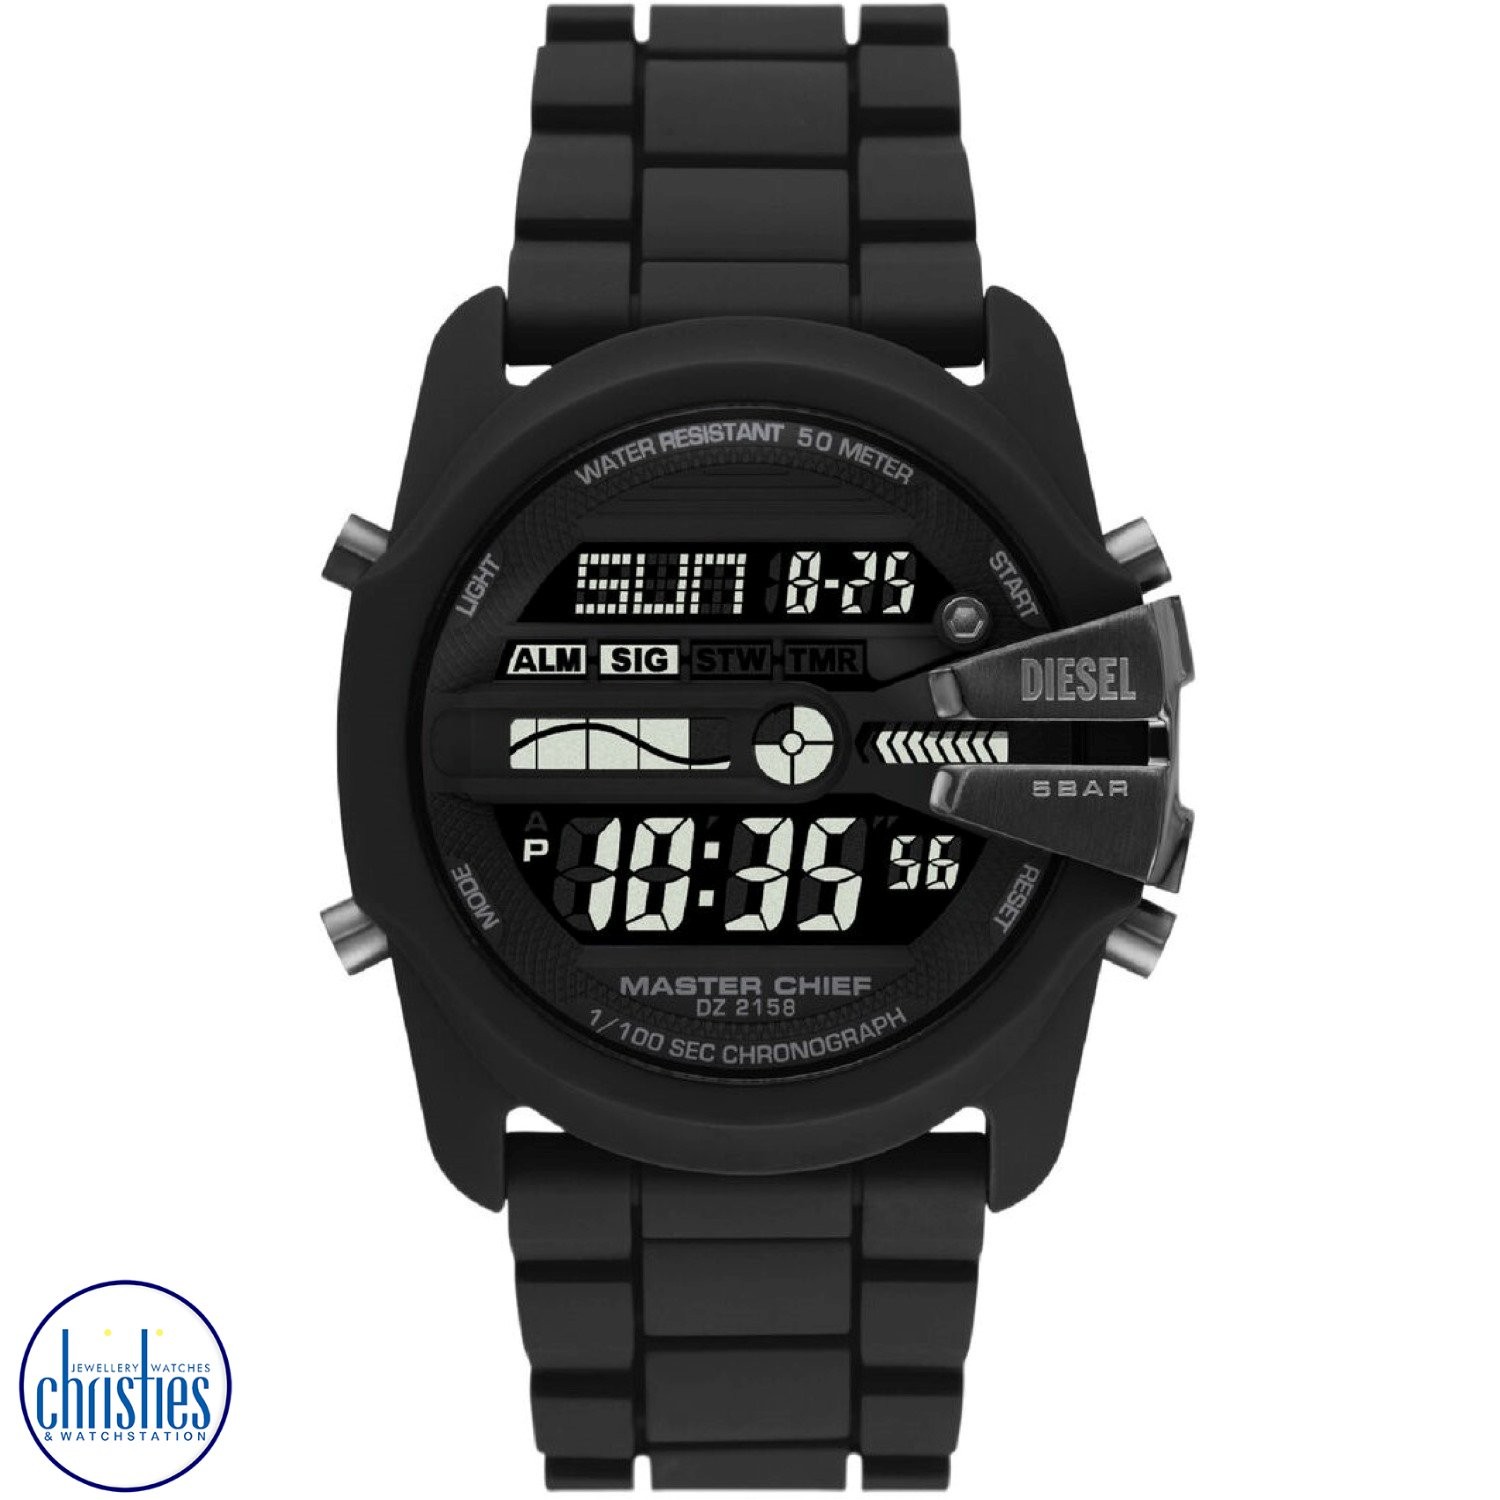 DZ2158 Diesel Master Chief Digital Black Silicone Watch. unique engagement rings nz  The DZ2158 Diesel Master Chief Digital Black Silicone Watch is a stylish and durable timepiece designed for the modern man.